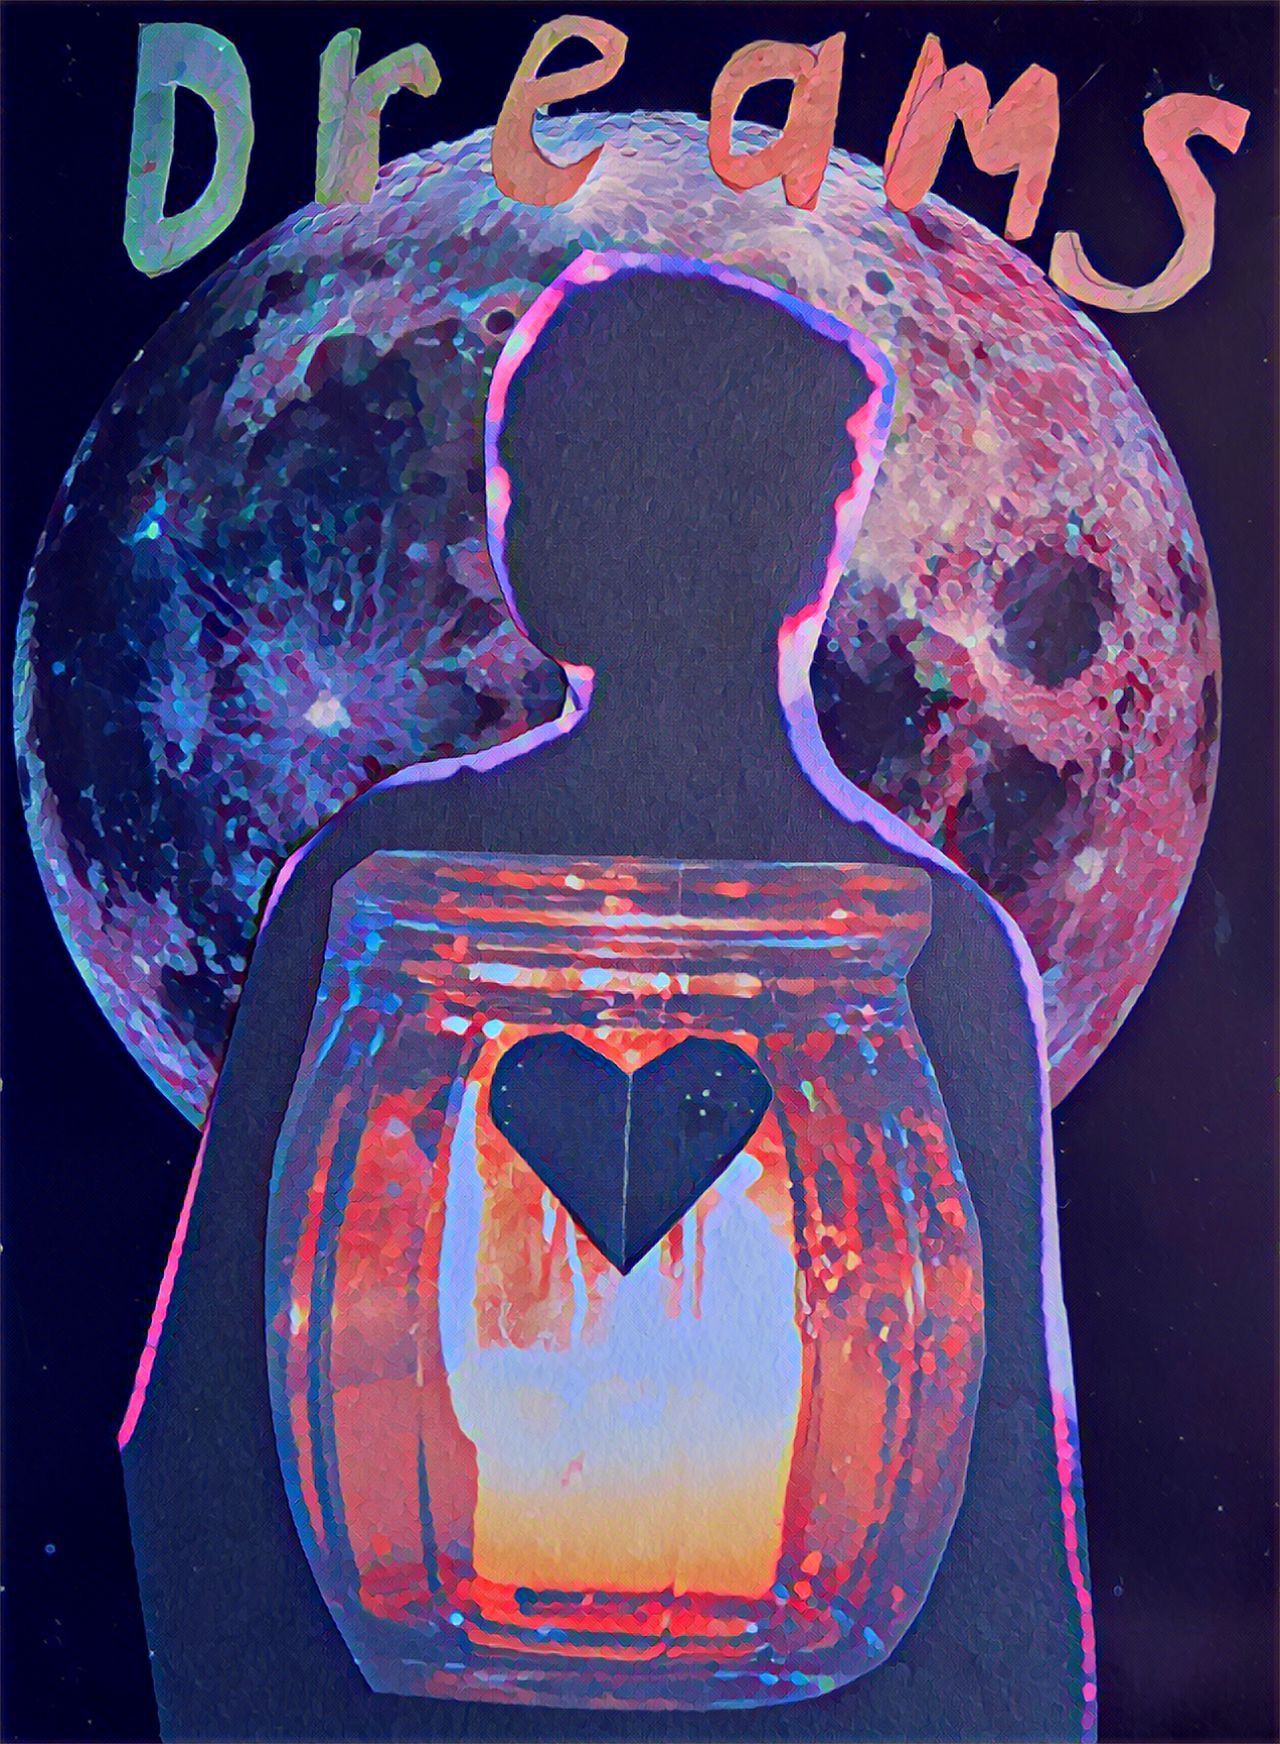 collage of silhouette of woman in front of moon, words dreams and a jar candle with a heart in front of her.  dream interpretation the study and analysis of dreams